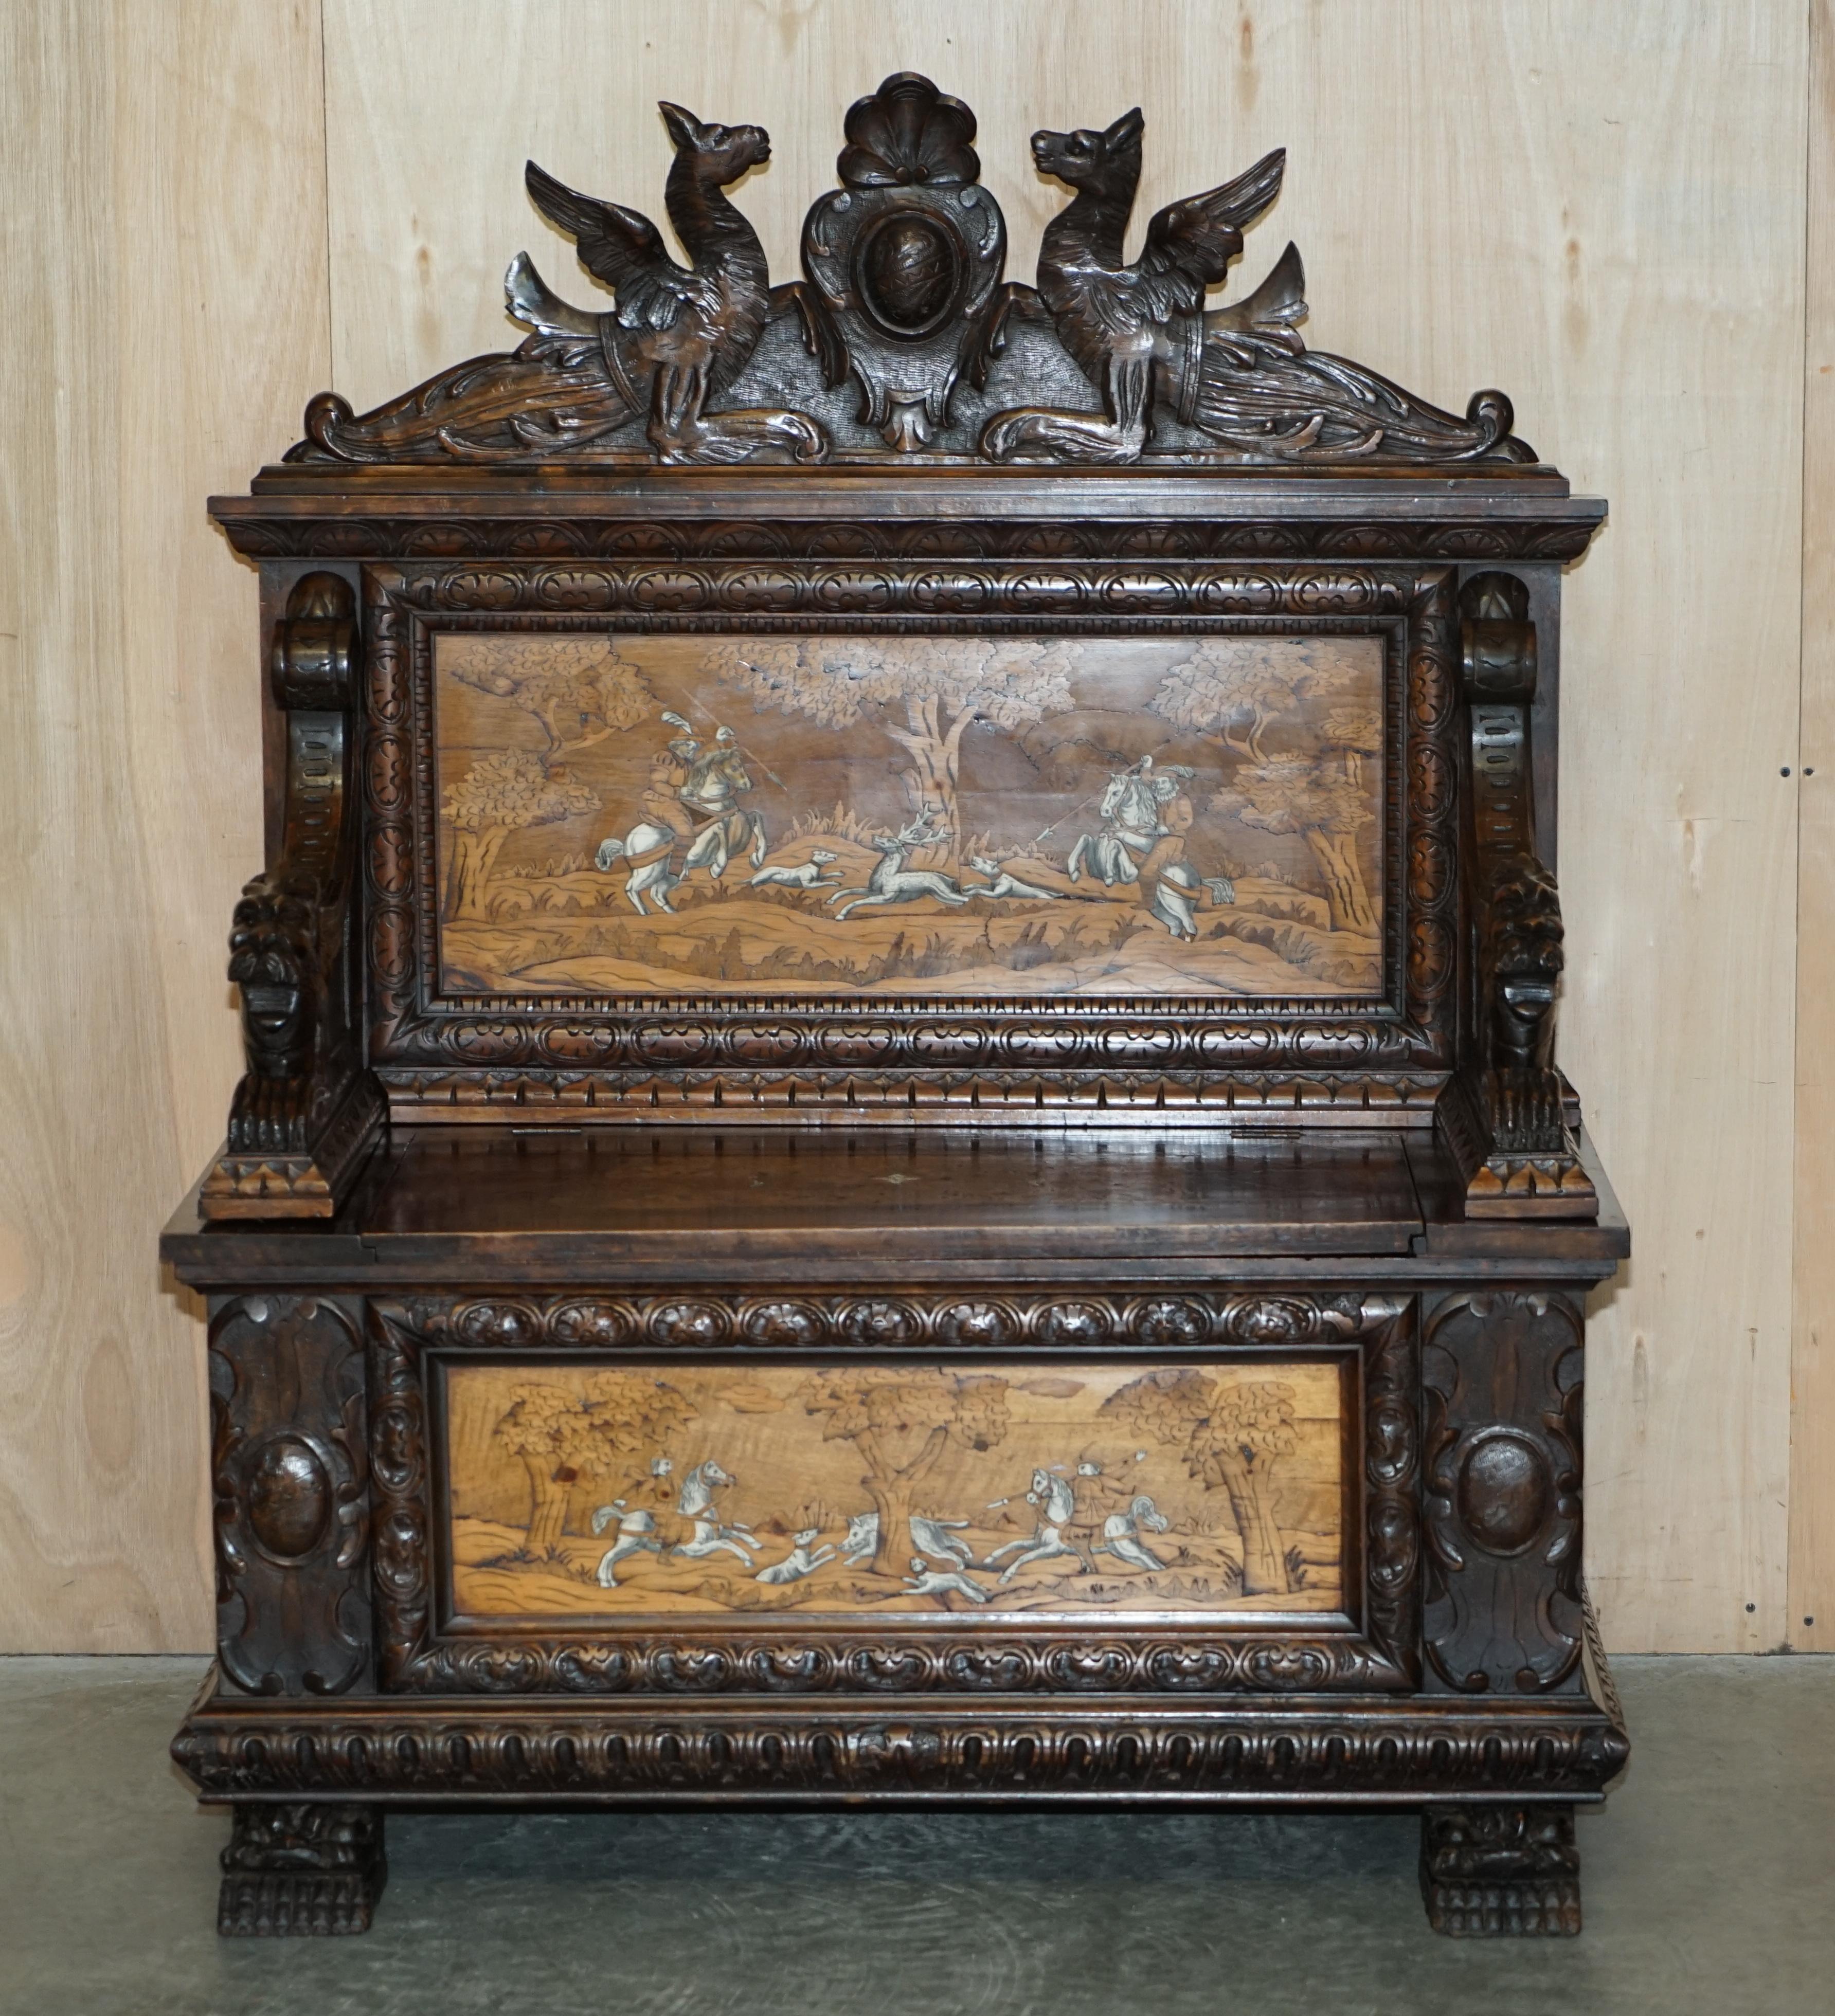 We are delighted to offer for sale this stunning hand carved circa 1860 Monks oak settle bench with internal storage from the north of Italy depicting Lions, Griffons, and a coat of arms with hunting scenes to the back and base

A very good